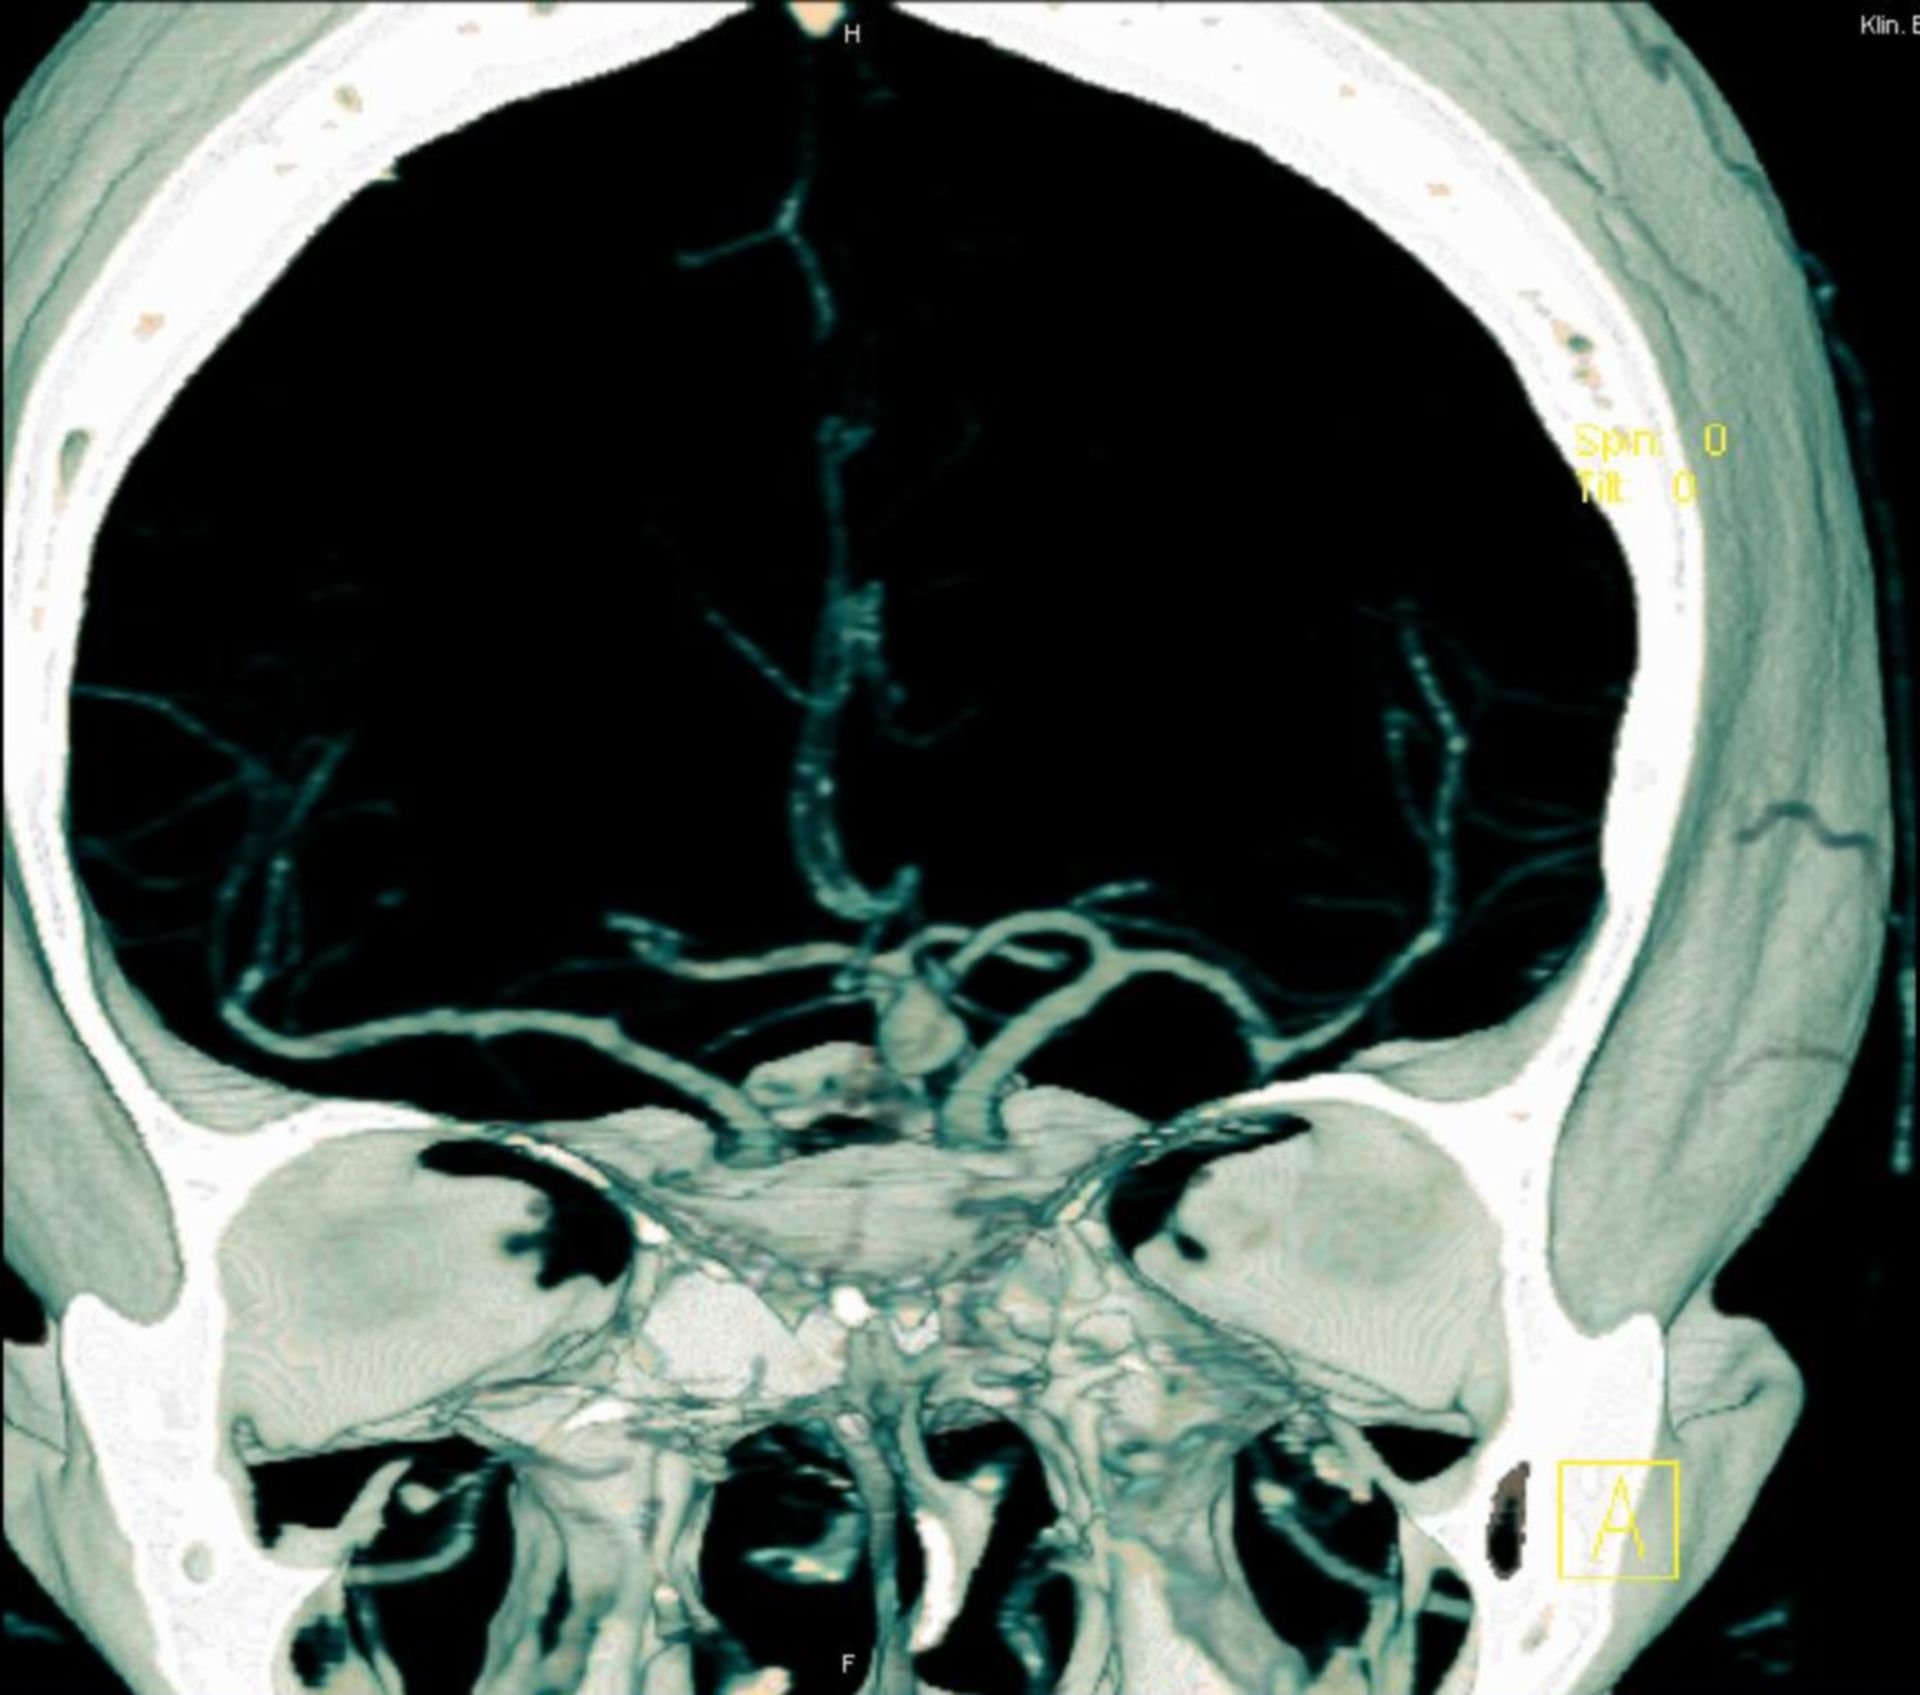 Aneurysm of the left anterior communicating branch (RCA)